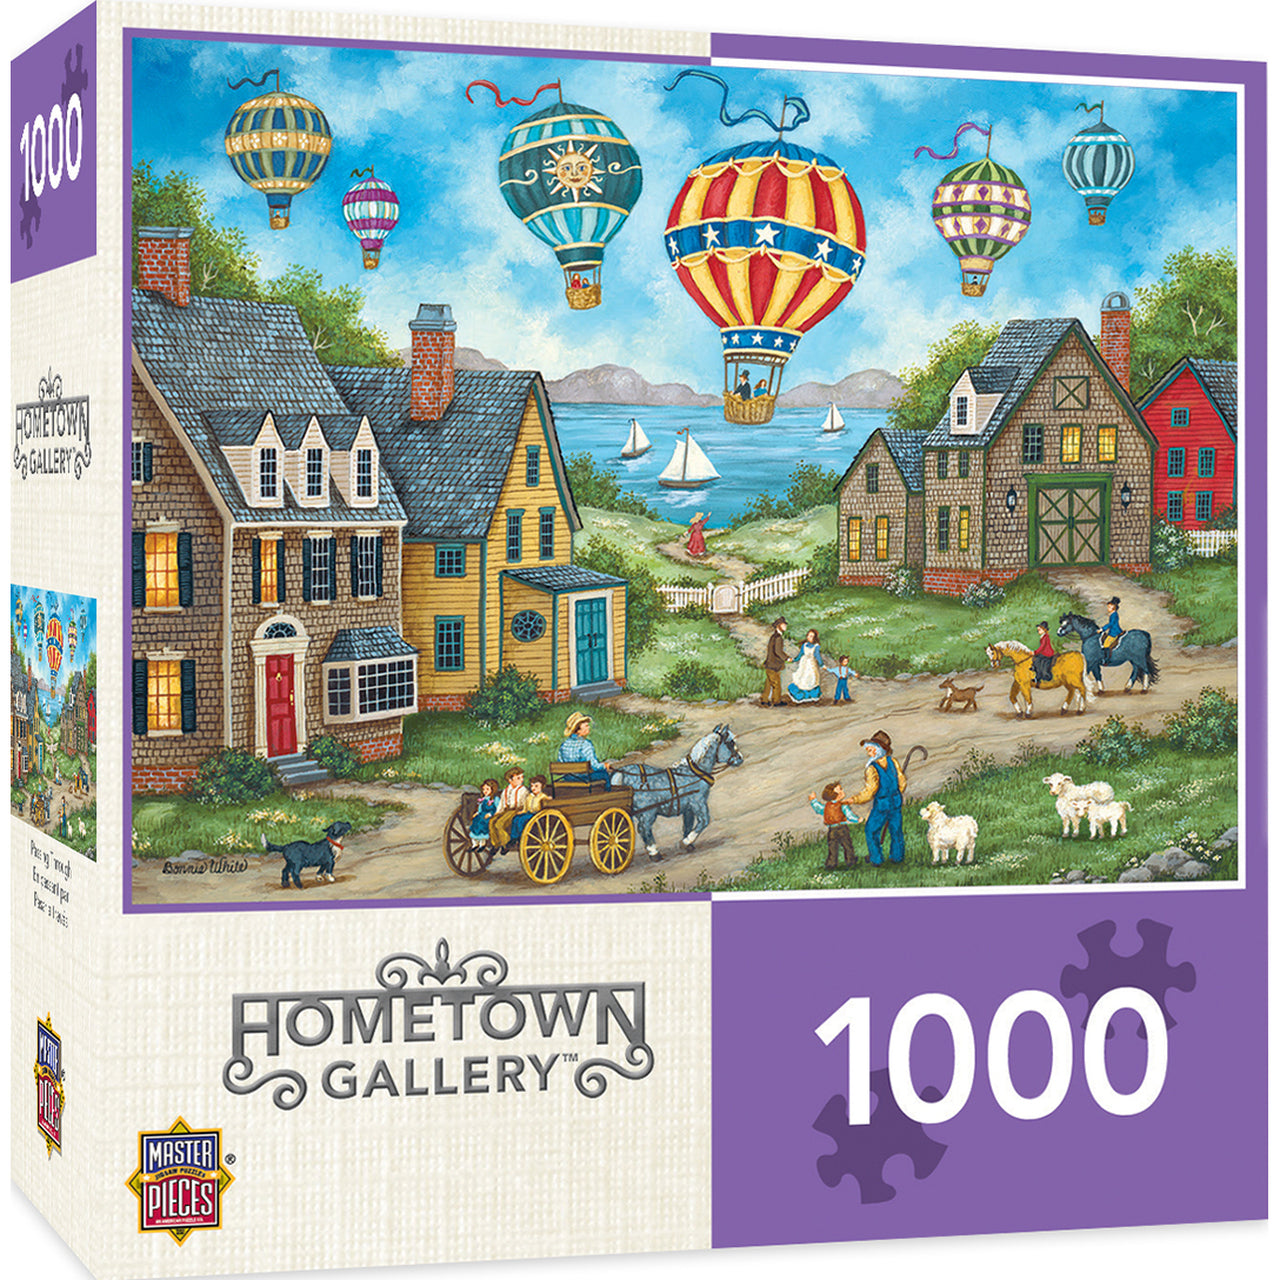 Hometown Gallery - Passing Through 1000 Piece Jigsaw Puzzle by Masterpieces